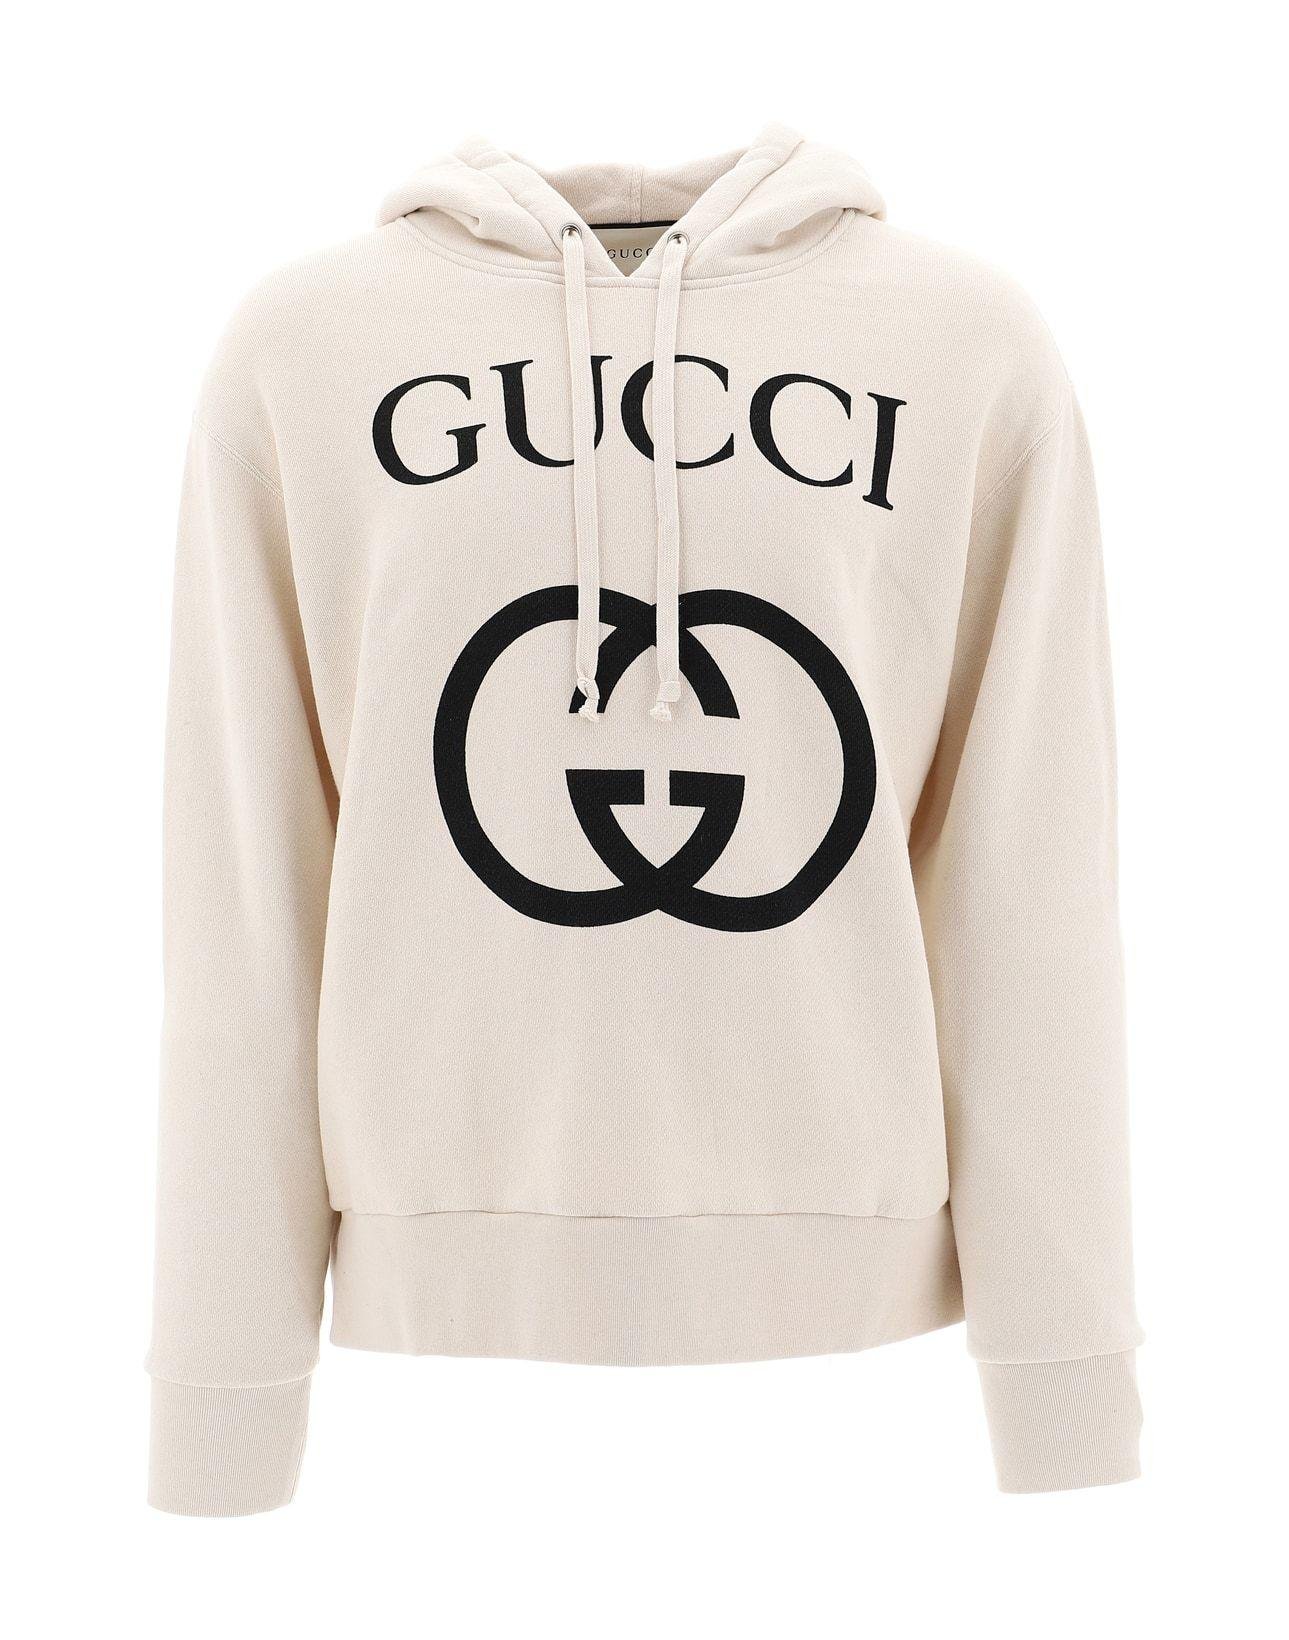 Gucci Logo Print Hoodie in White for Men - Lyst